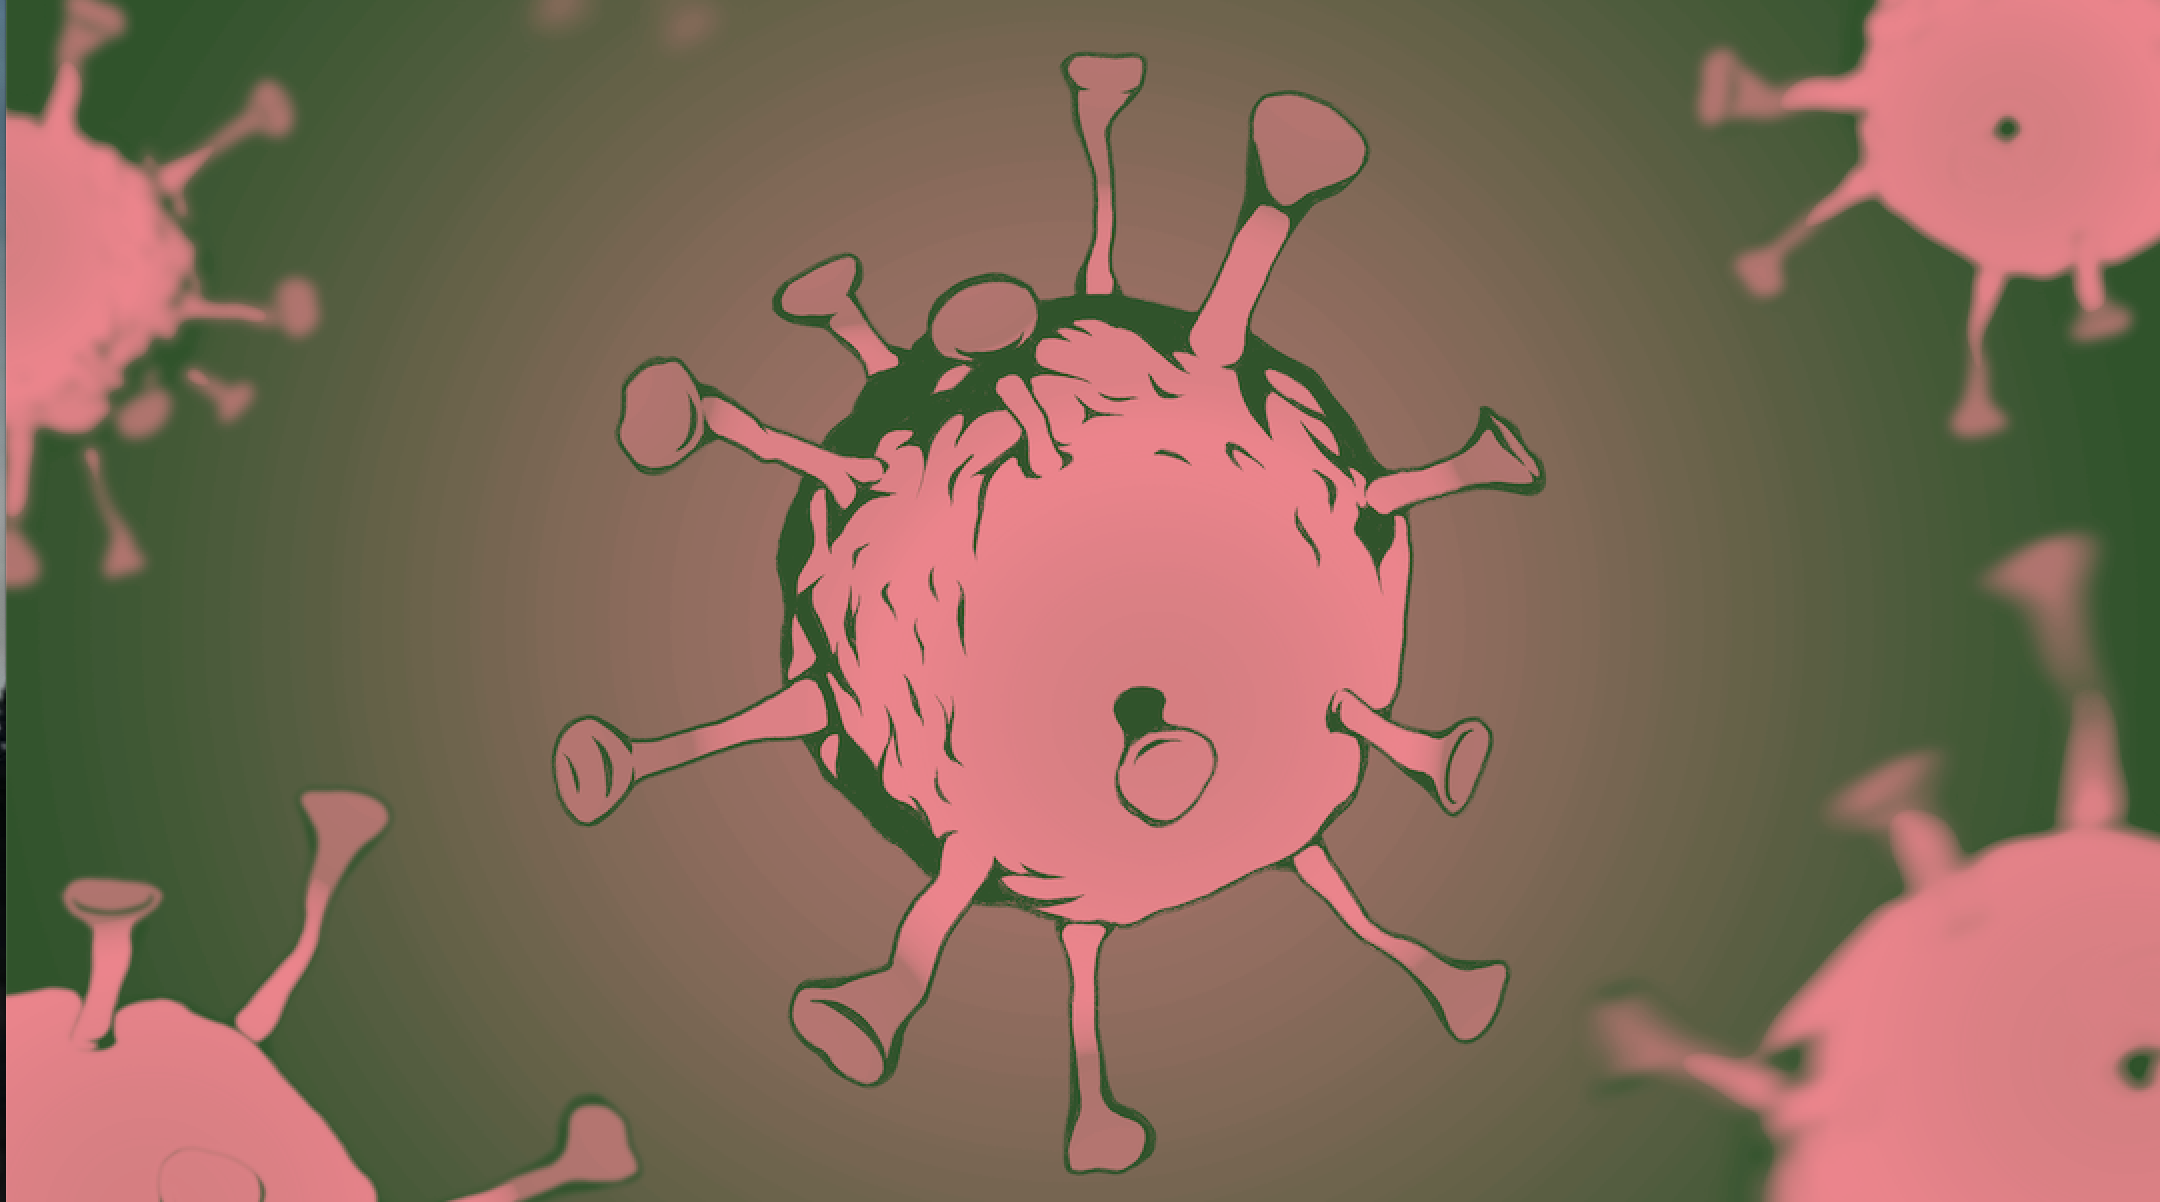 A SARS-CoV-2 virus, depicted in pink against a green background